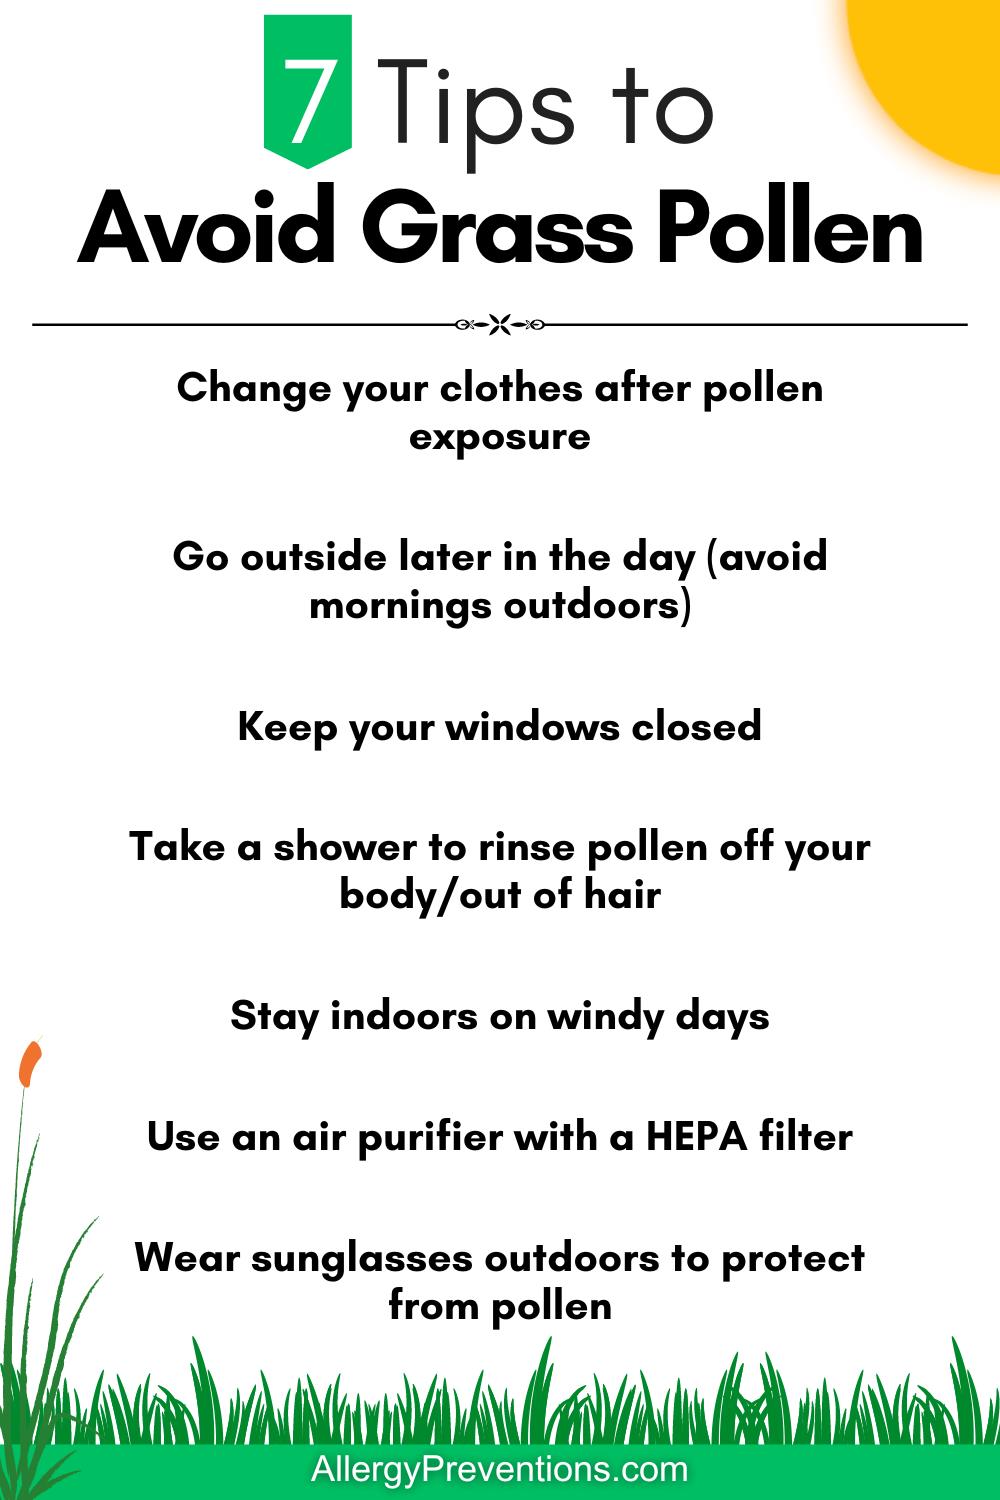 Tips to avoid grass pollen infographic: Change your clothes after pollen exposure, Go outside later in the day (avoid mornings outdoors), Keep your windows closed, Take a shower to rinse pollen off your body/out of hair, Stay indoors on windy days, Use an air purifier with a HEPA filter, Wear sunglasses outdoors to protect from pollen.